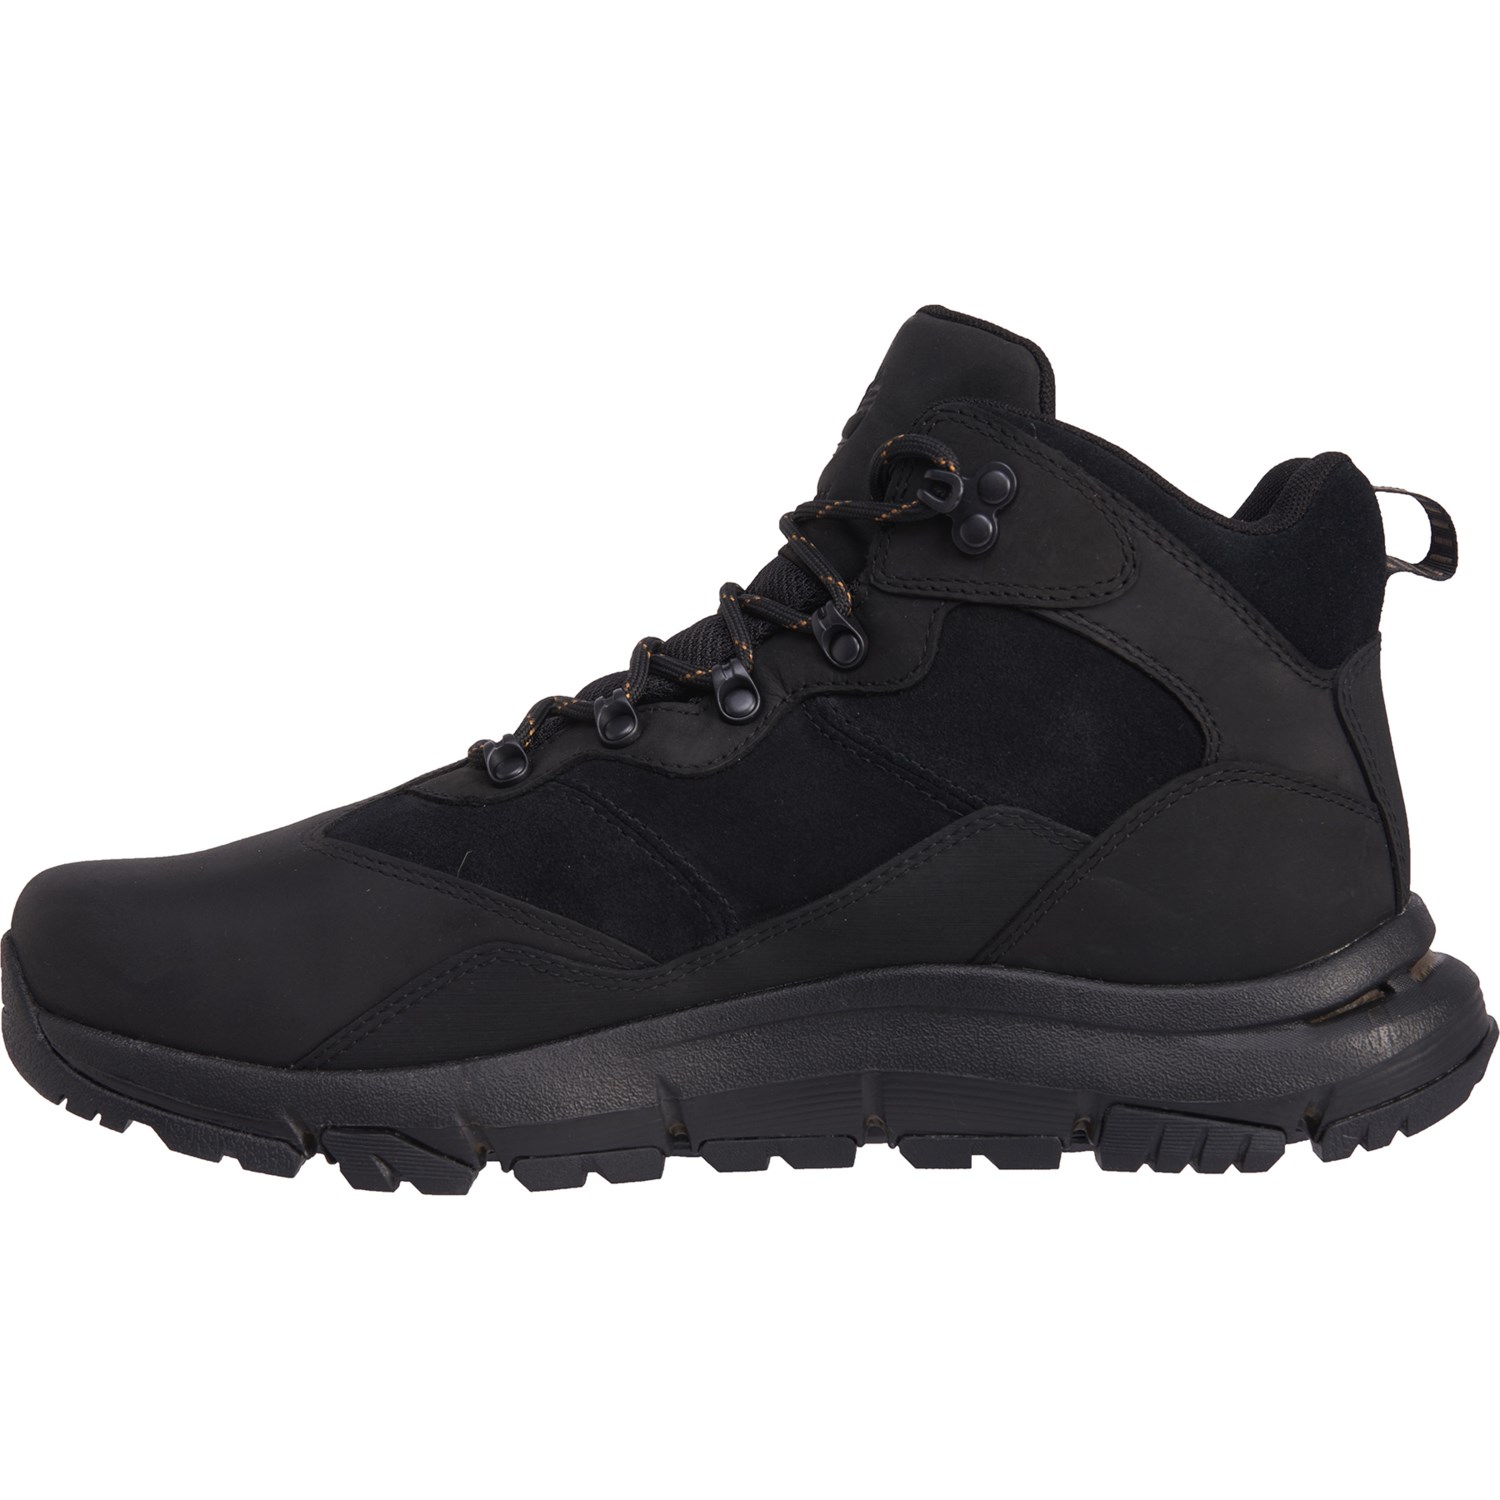 Timberland Garrison Field Mid Hiking Boots (For Men) - Save 50%